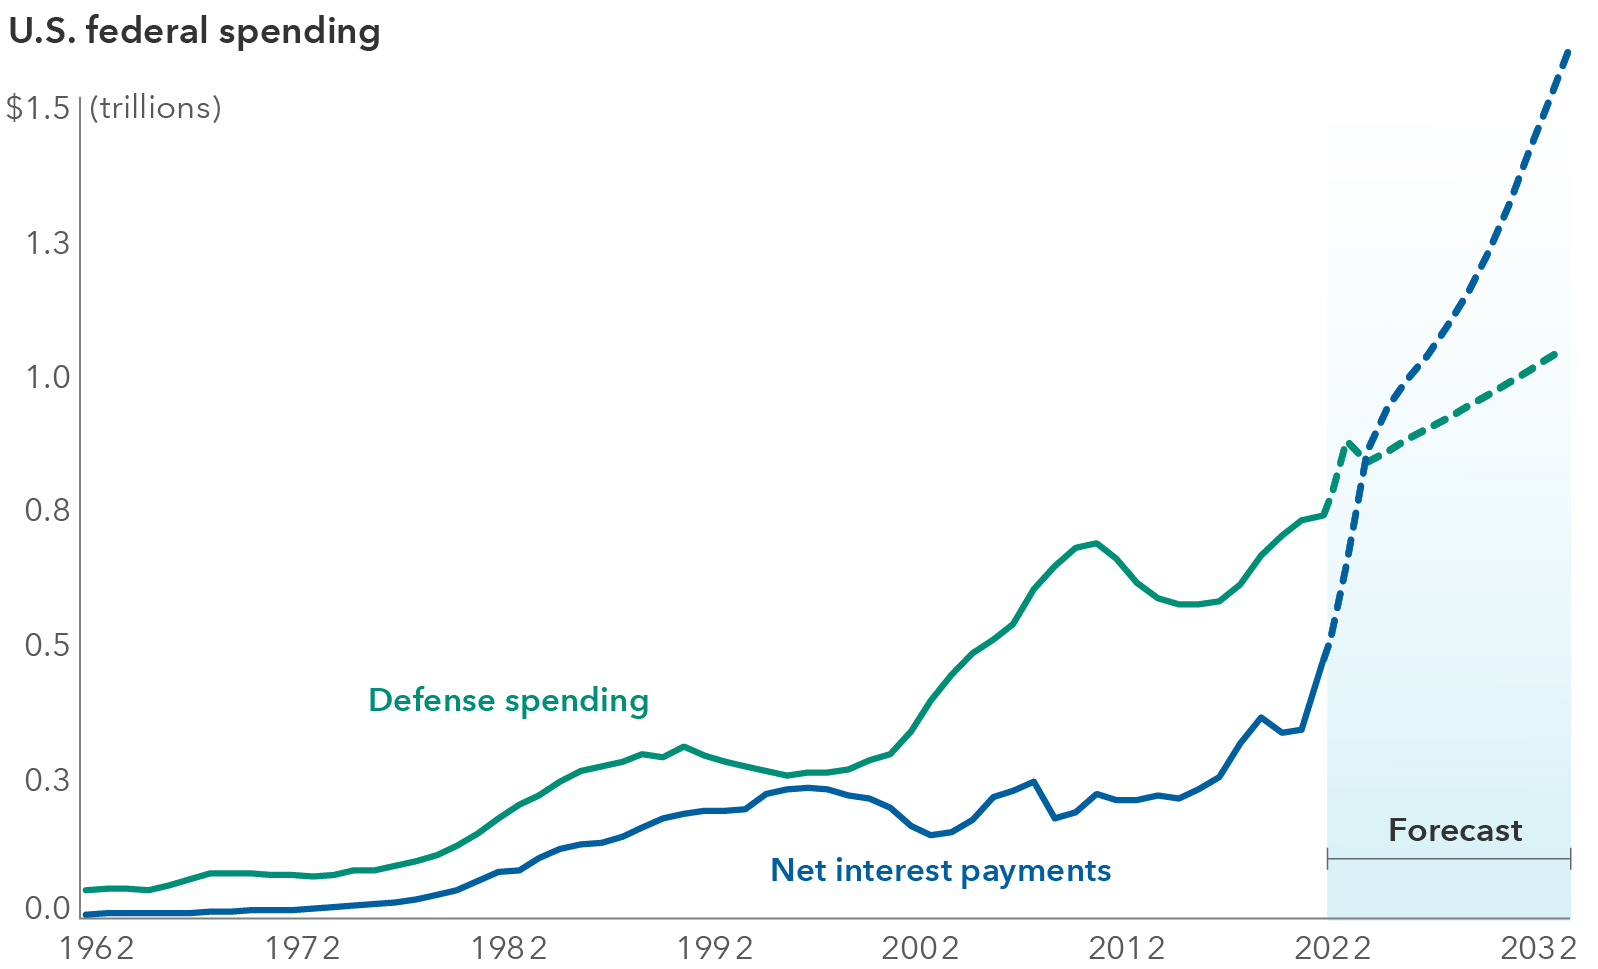 The line chart shows the growth of U.S. government spending in trillions of U.S. dollars on defense and net interest payments from 1962 to 2023 and projections from the Congressional Budget Office (CBO) for 2024 to 2034. Dotted lines indicate forecasted values from the CBO. Defense spending has grown from $0.05 trillion in 1962 to $0.89 trillion in 2023. Net interest payments have grown from $0.01 trillion to $0.66 trillion over the same period. From 2024 to 2034, the CBO projects defense spending will grow to $1.07 trillion and net interest payments will grow to $1.63 trillion. Beginning in 2024, net interest payments are projected to surpass defense spending.